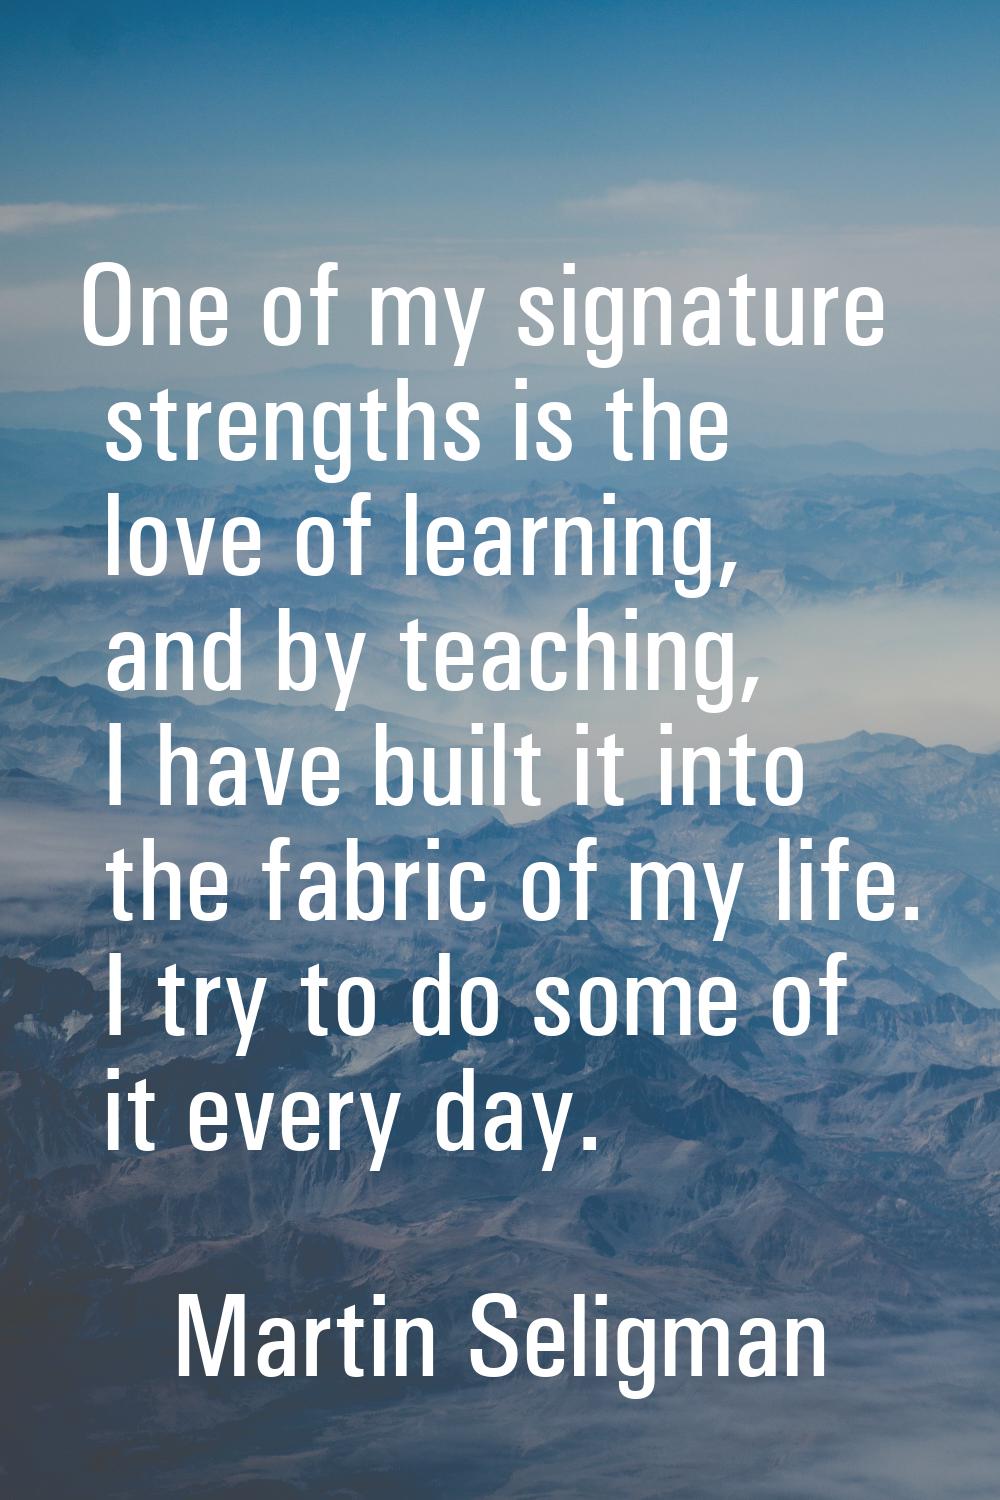 One of my signature strengths is the love of learning, and by teaching, I have built it into the fa